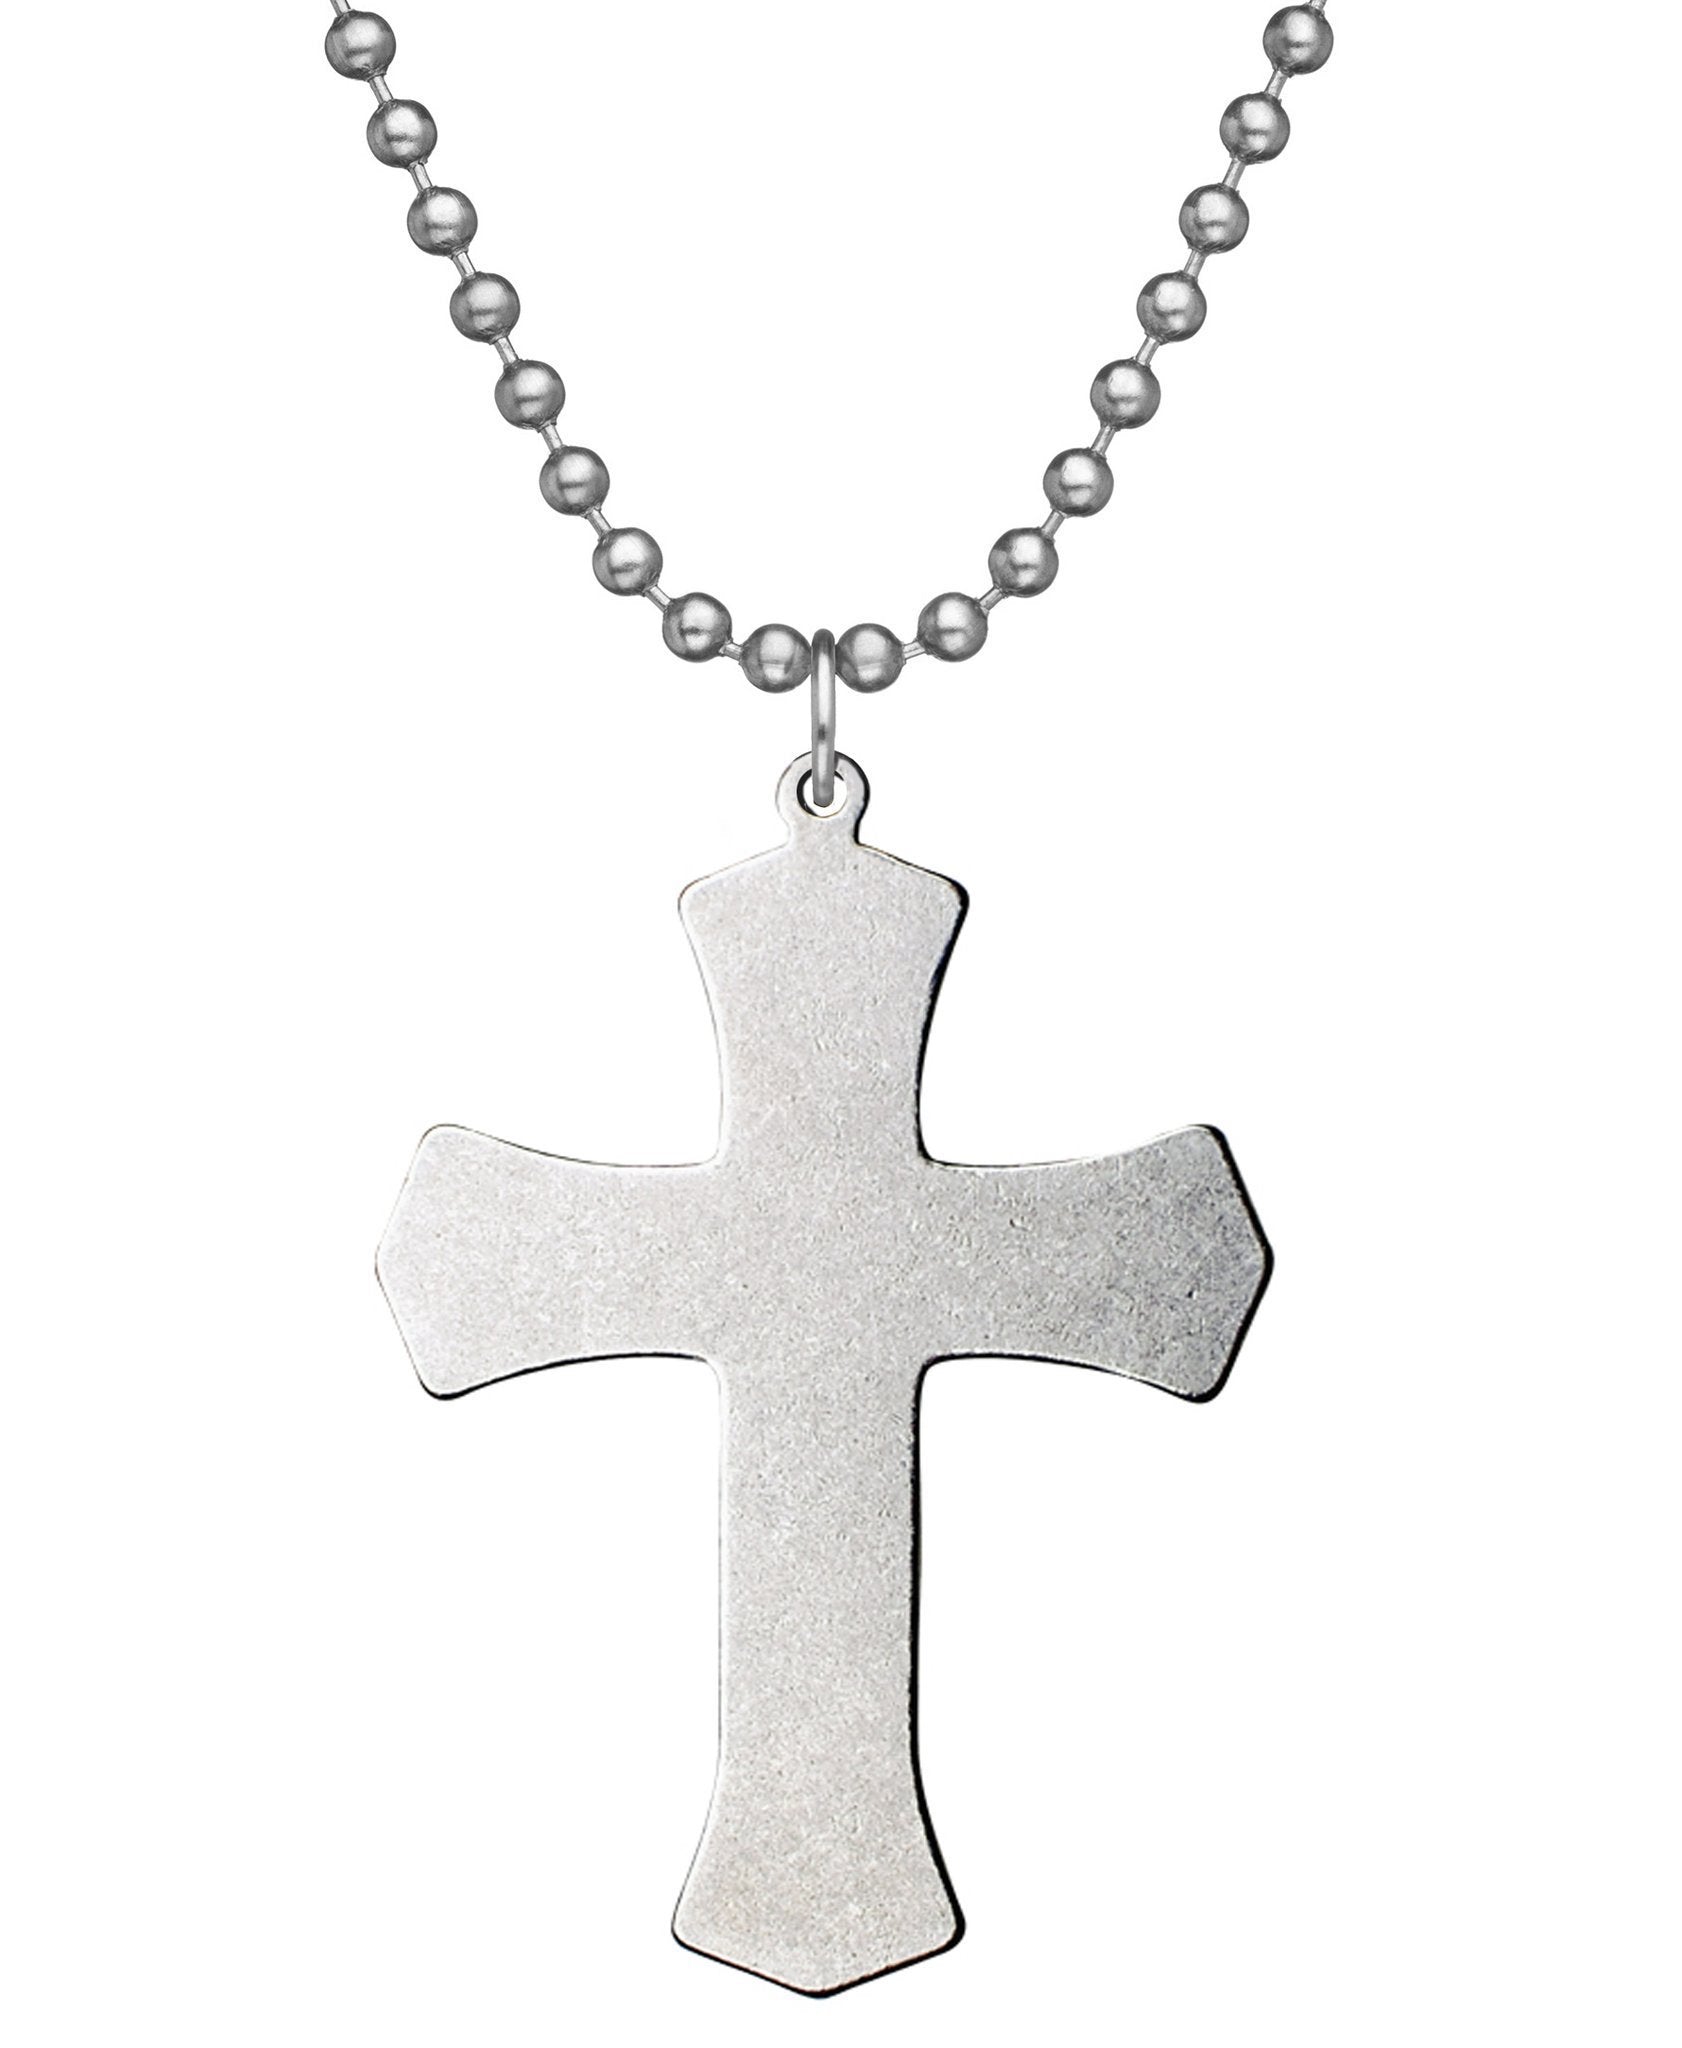 Warrior Cross Military Issue Necklace with Dog Tag Chain